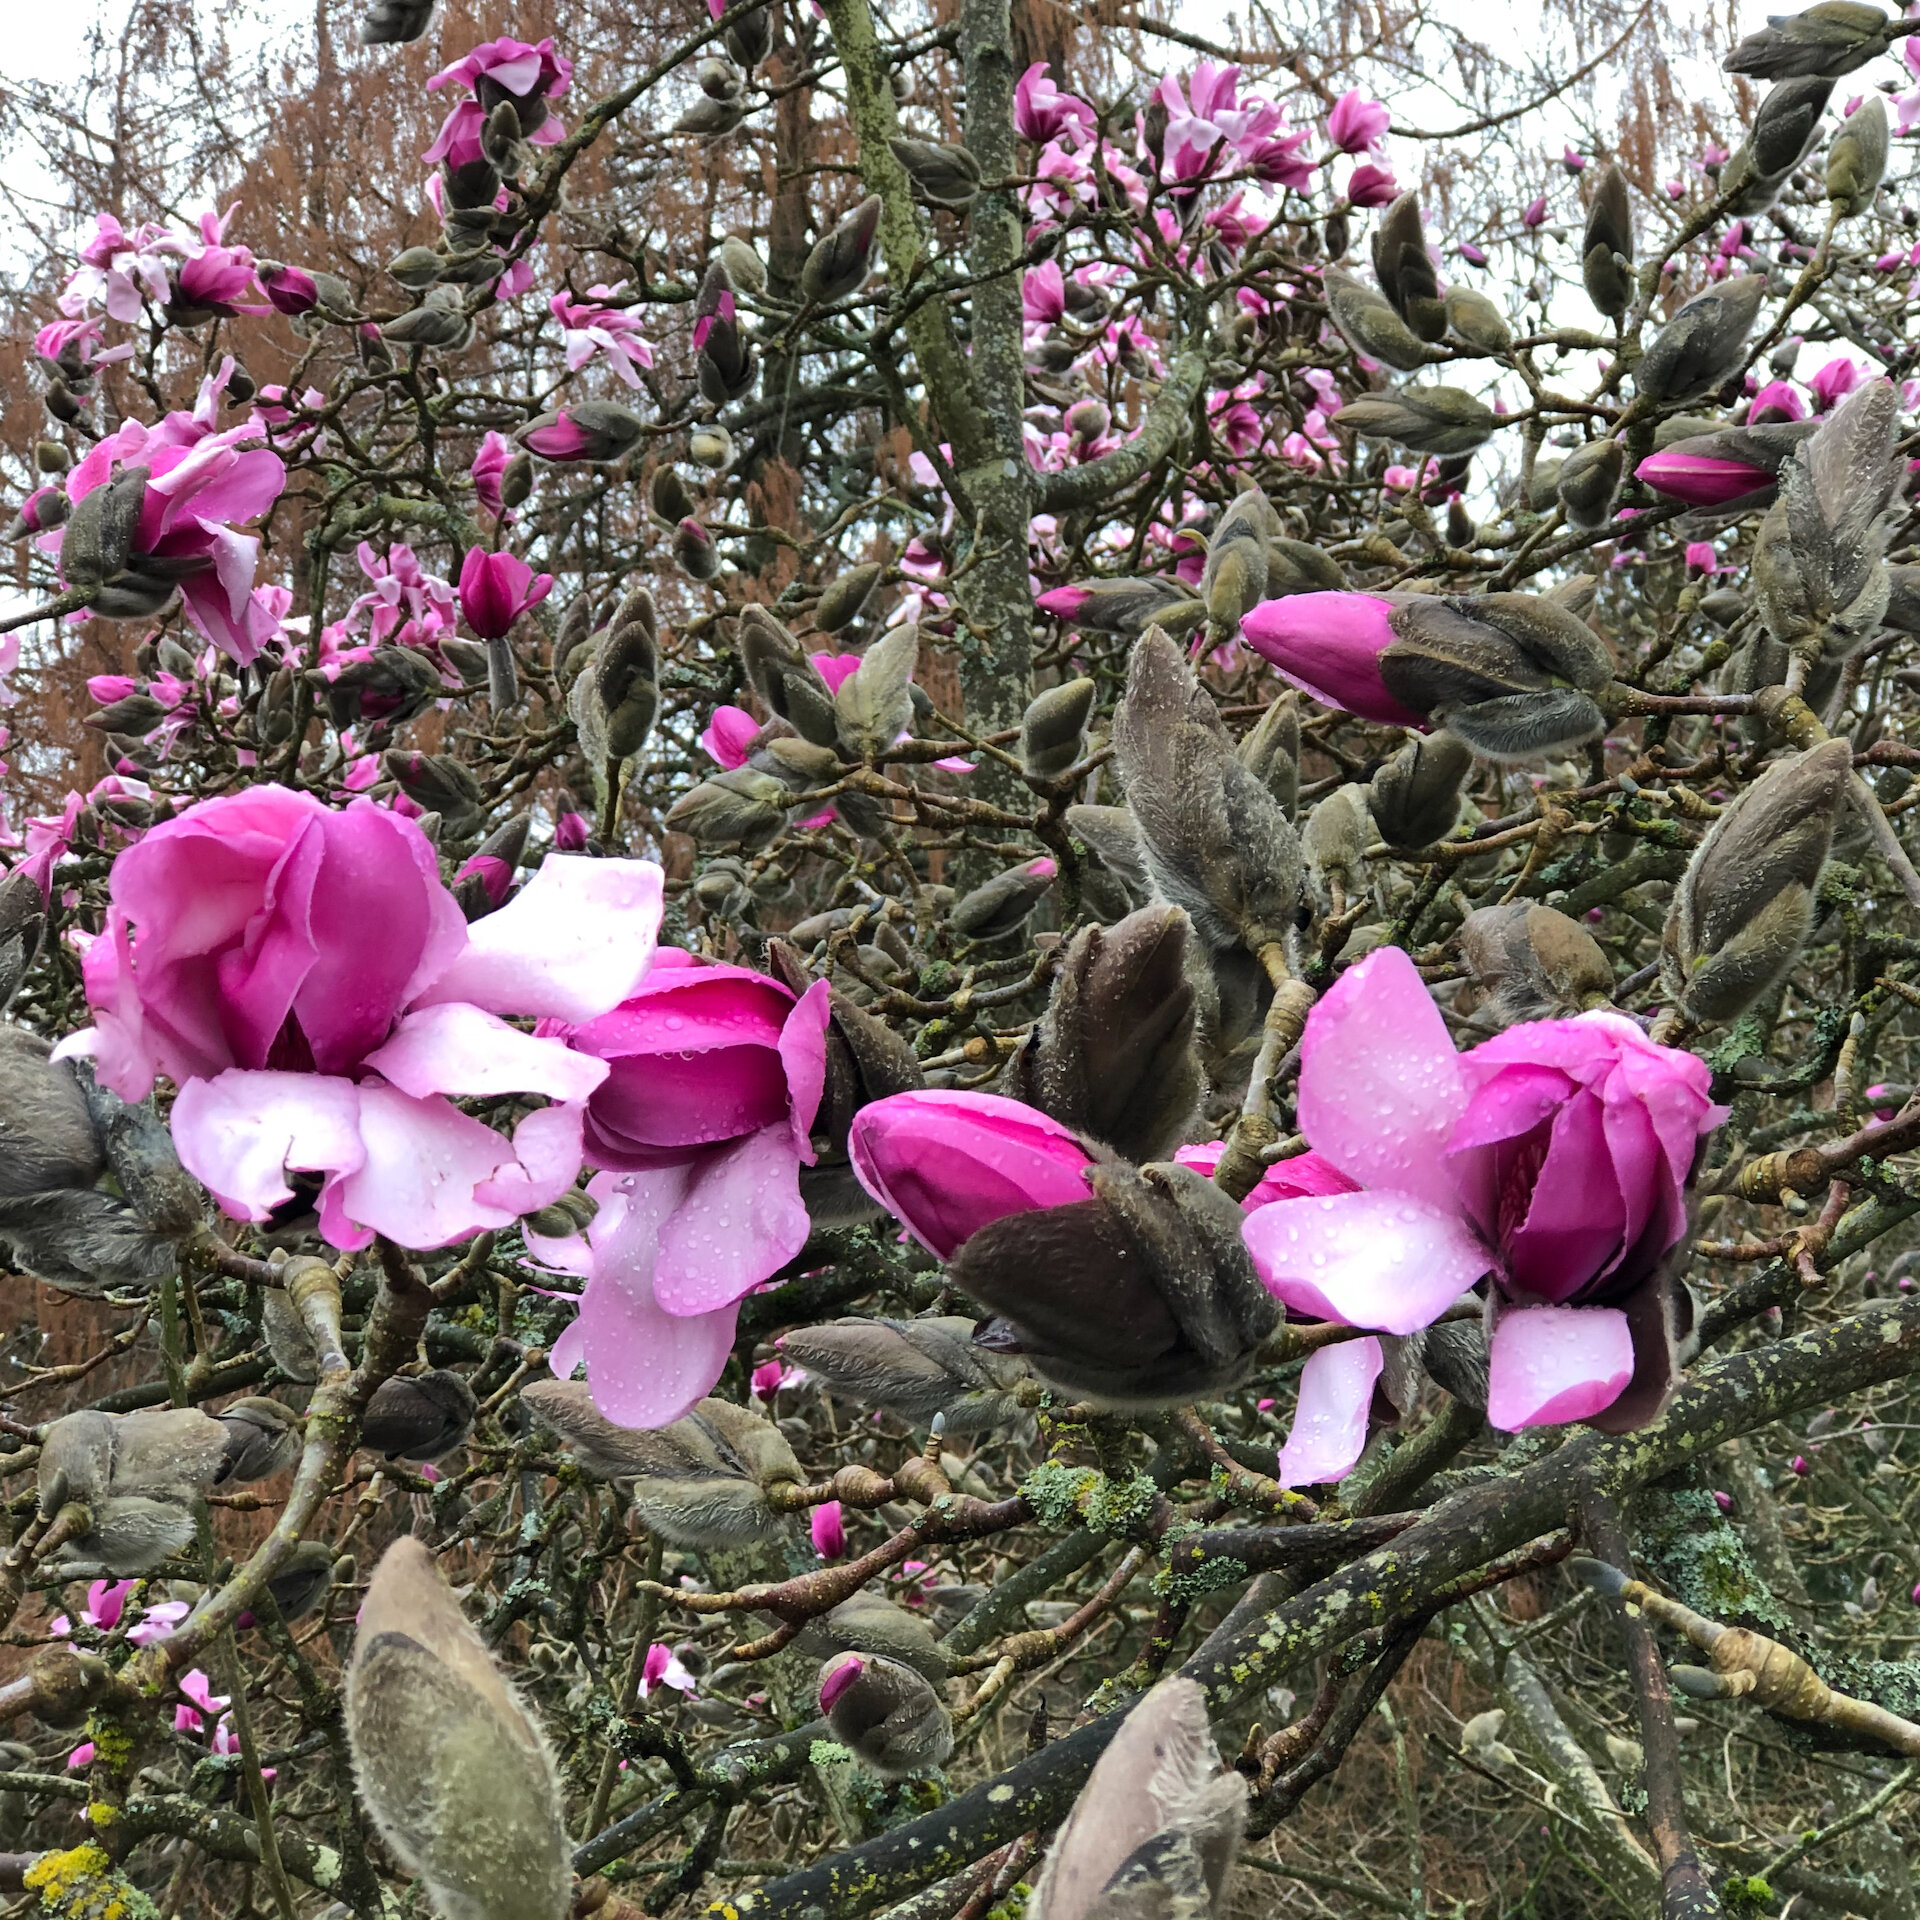  The magnolias are starting to come out. 